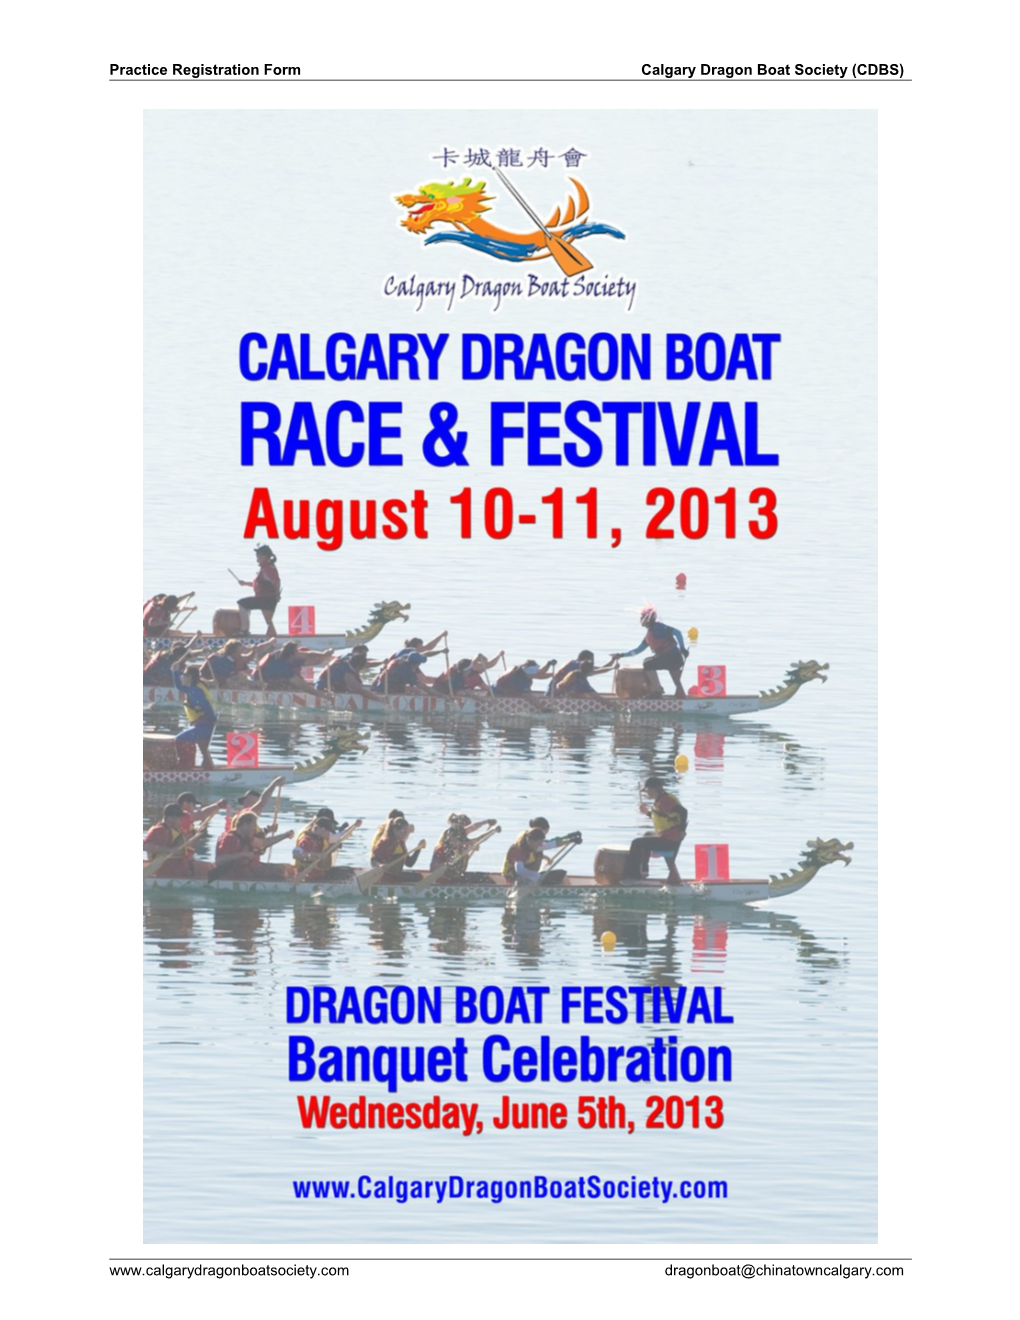 About the Calgary Dragon Boat Society